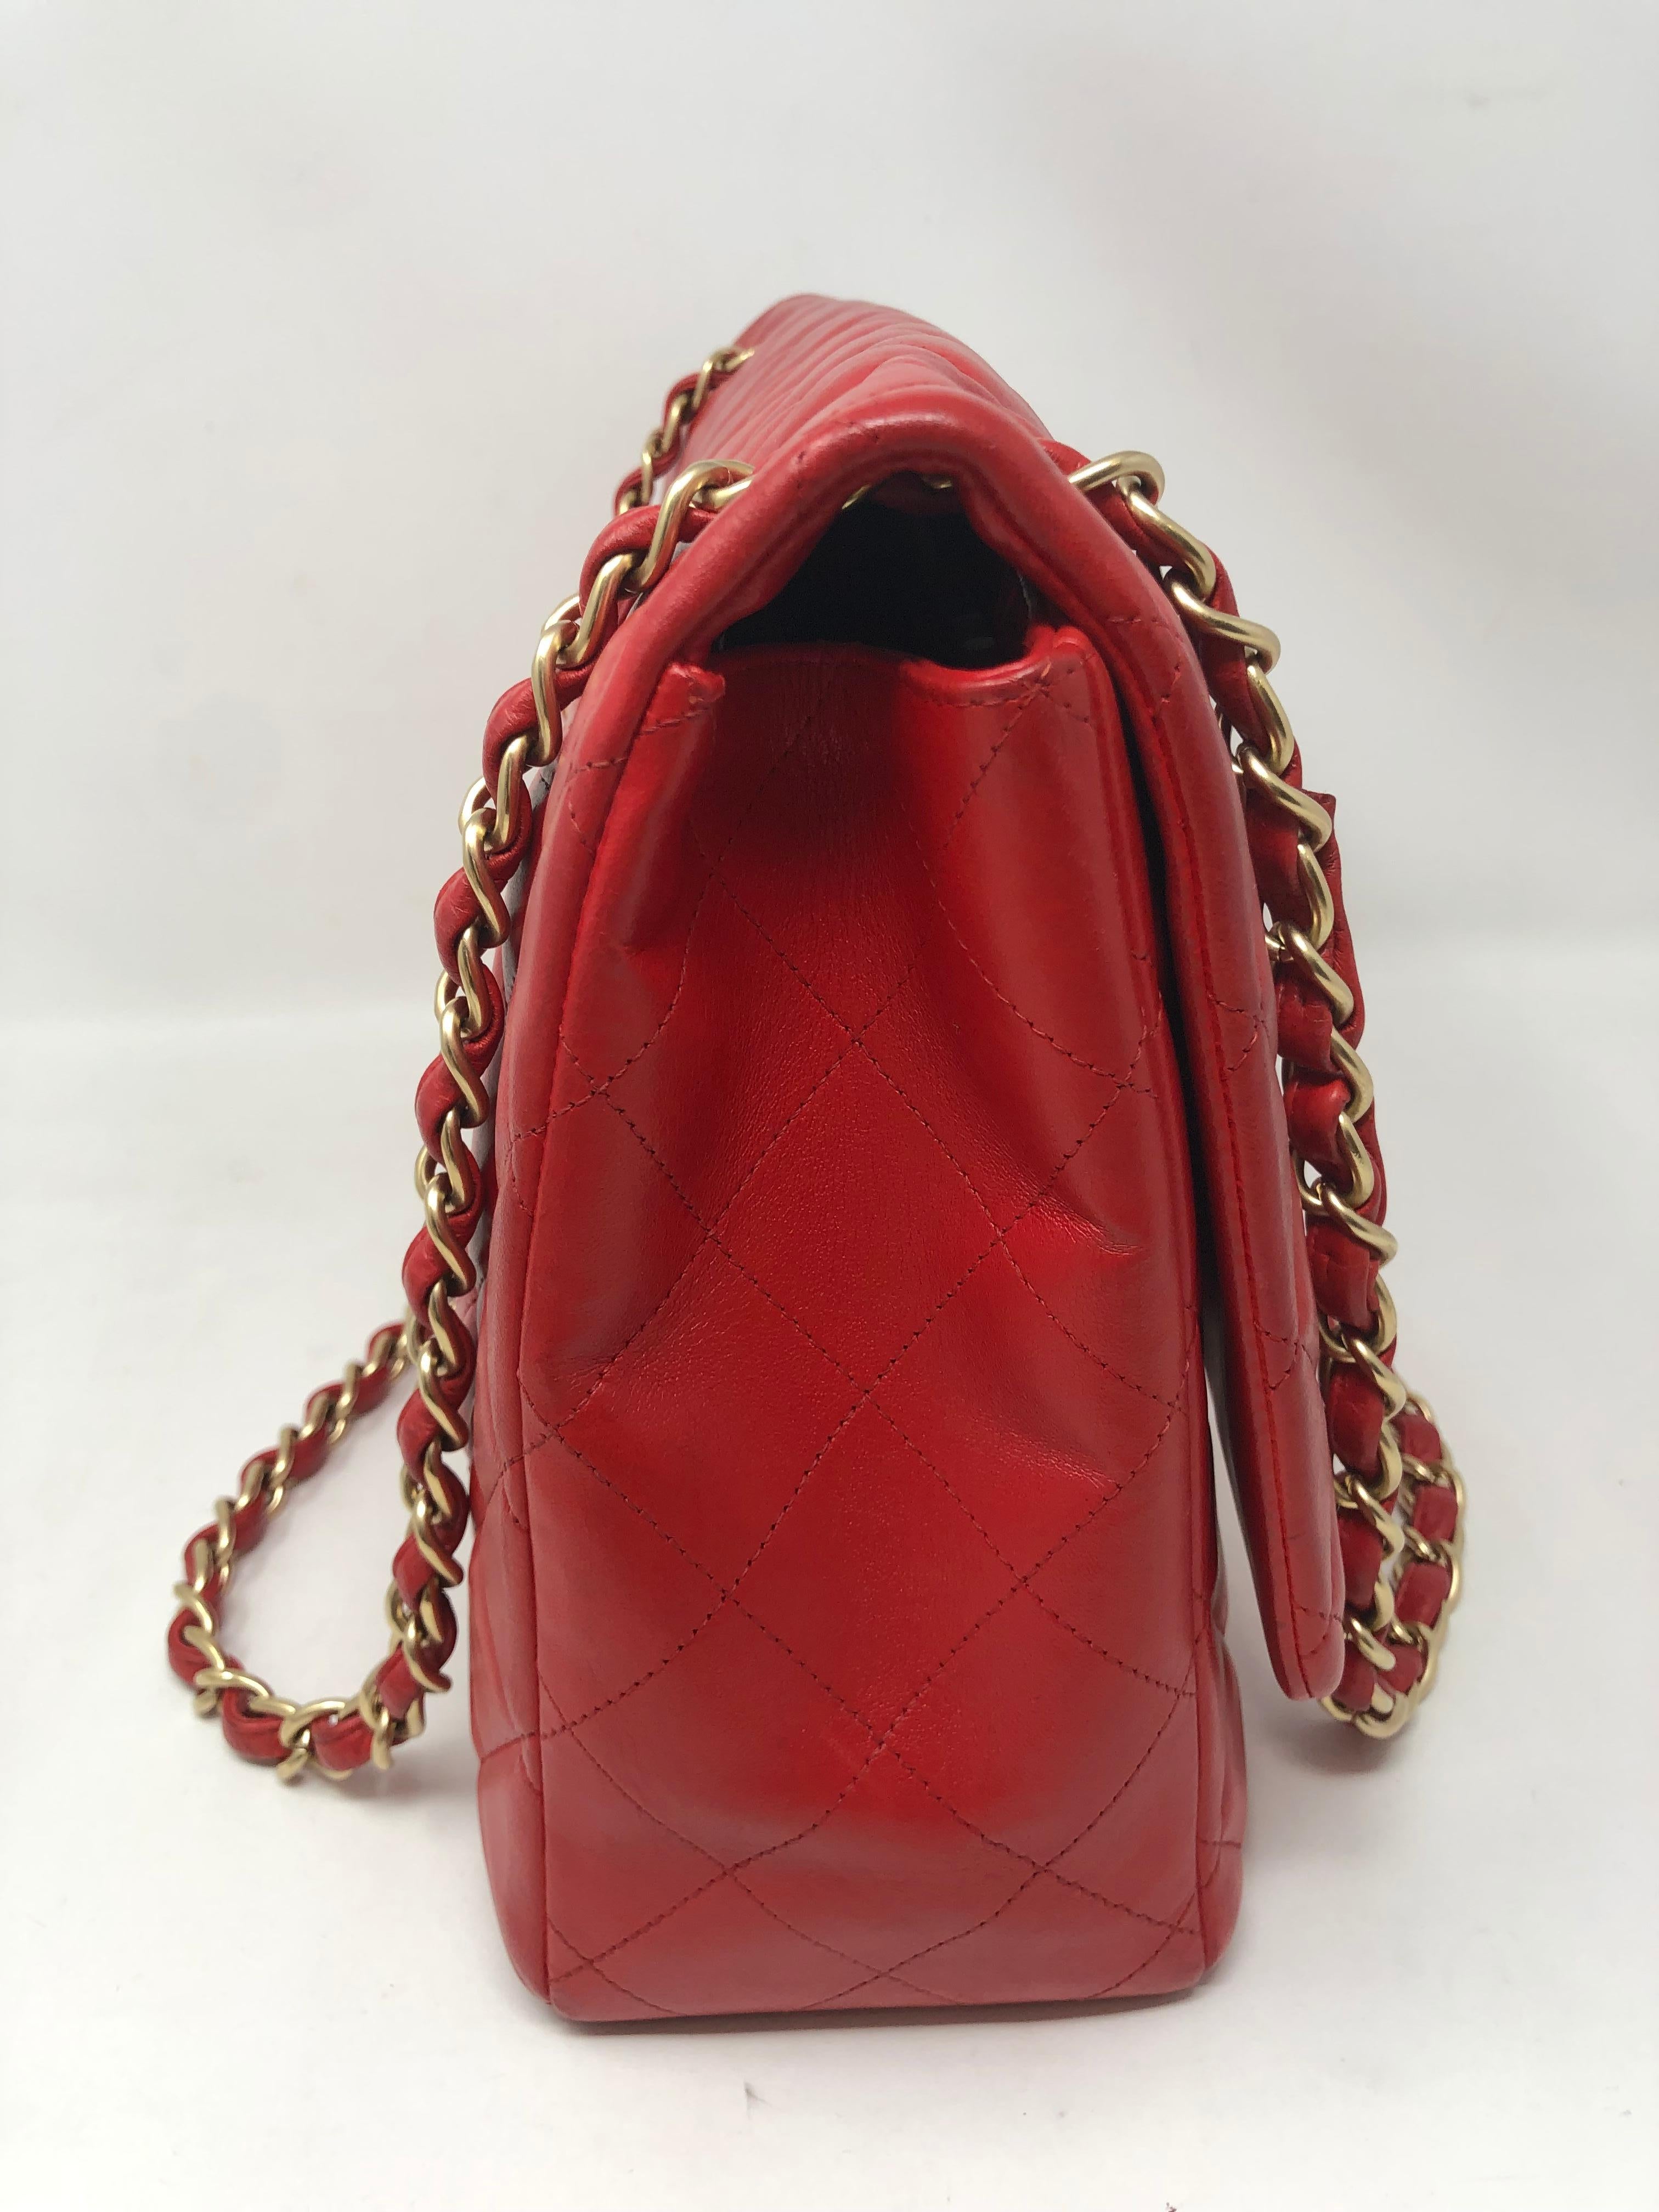 Women's or Men's Chanel Red Maxi Bag